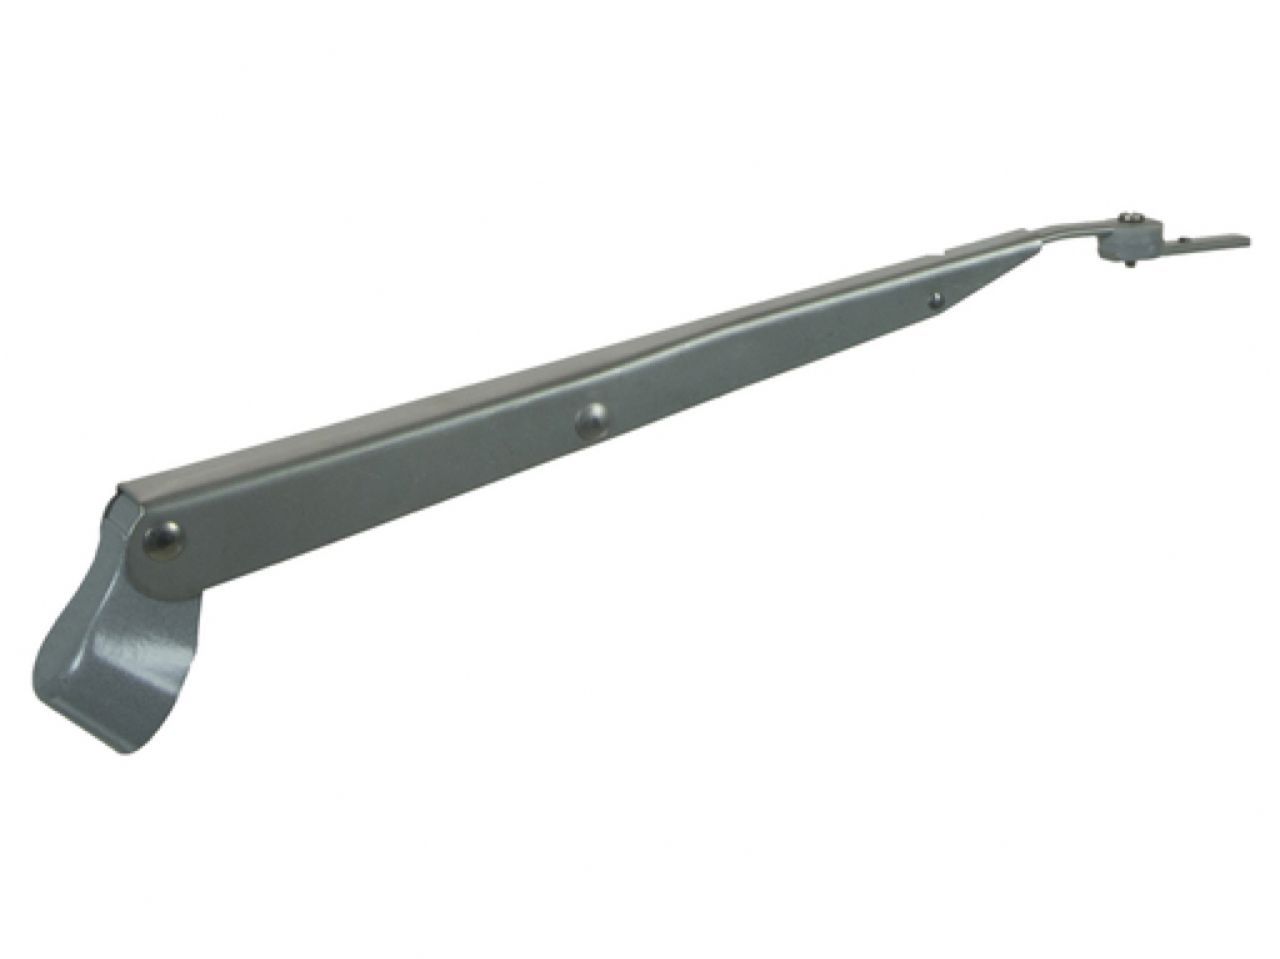 Anco Windshield Wipers 41-03 Item Image